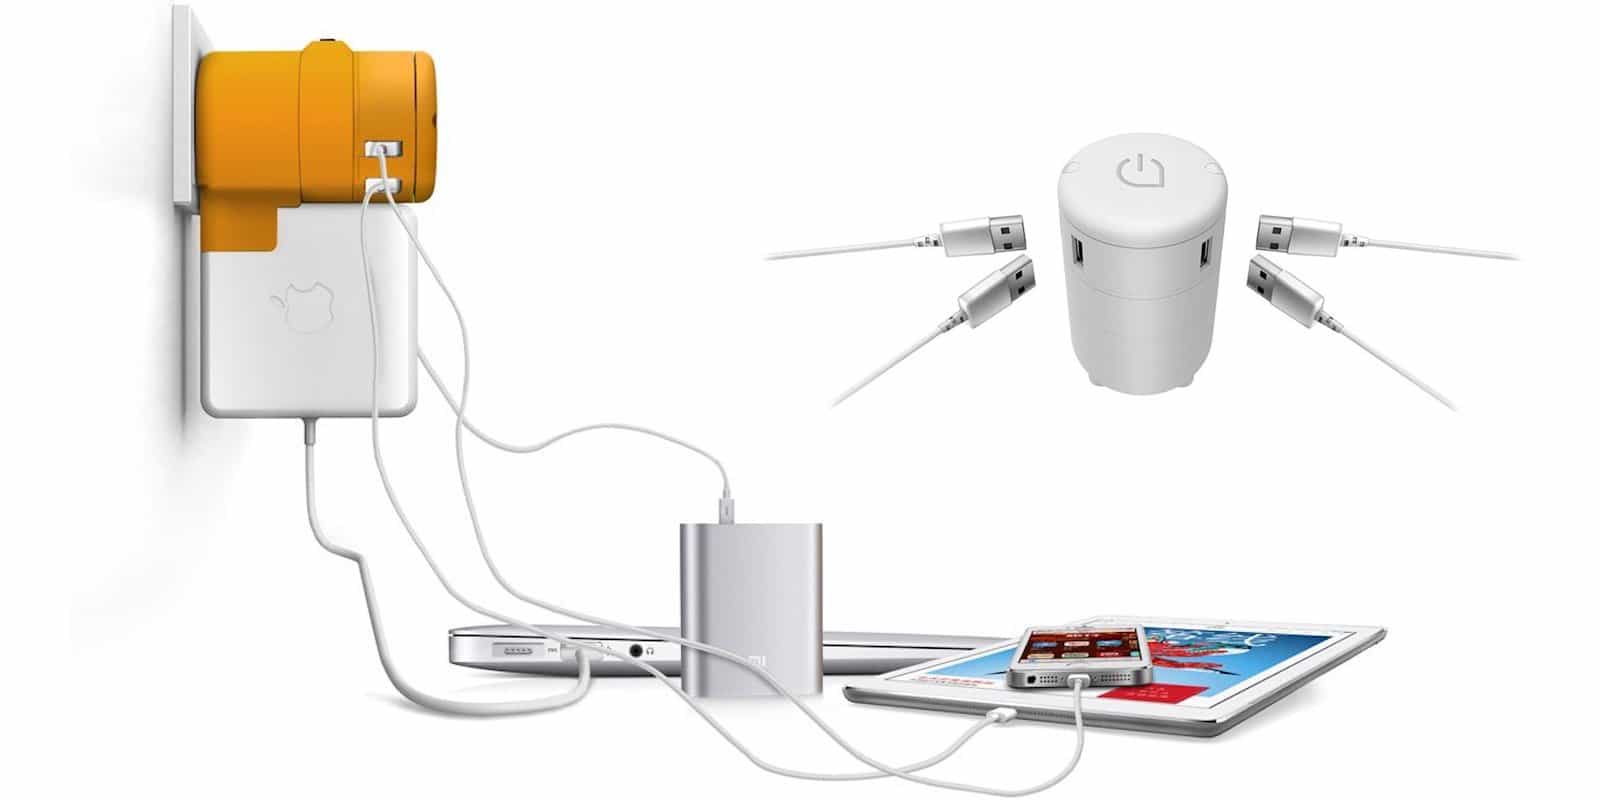 This pair of chargers can juice up your devices almost anywhere in the world.